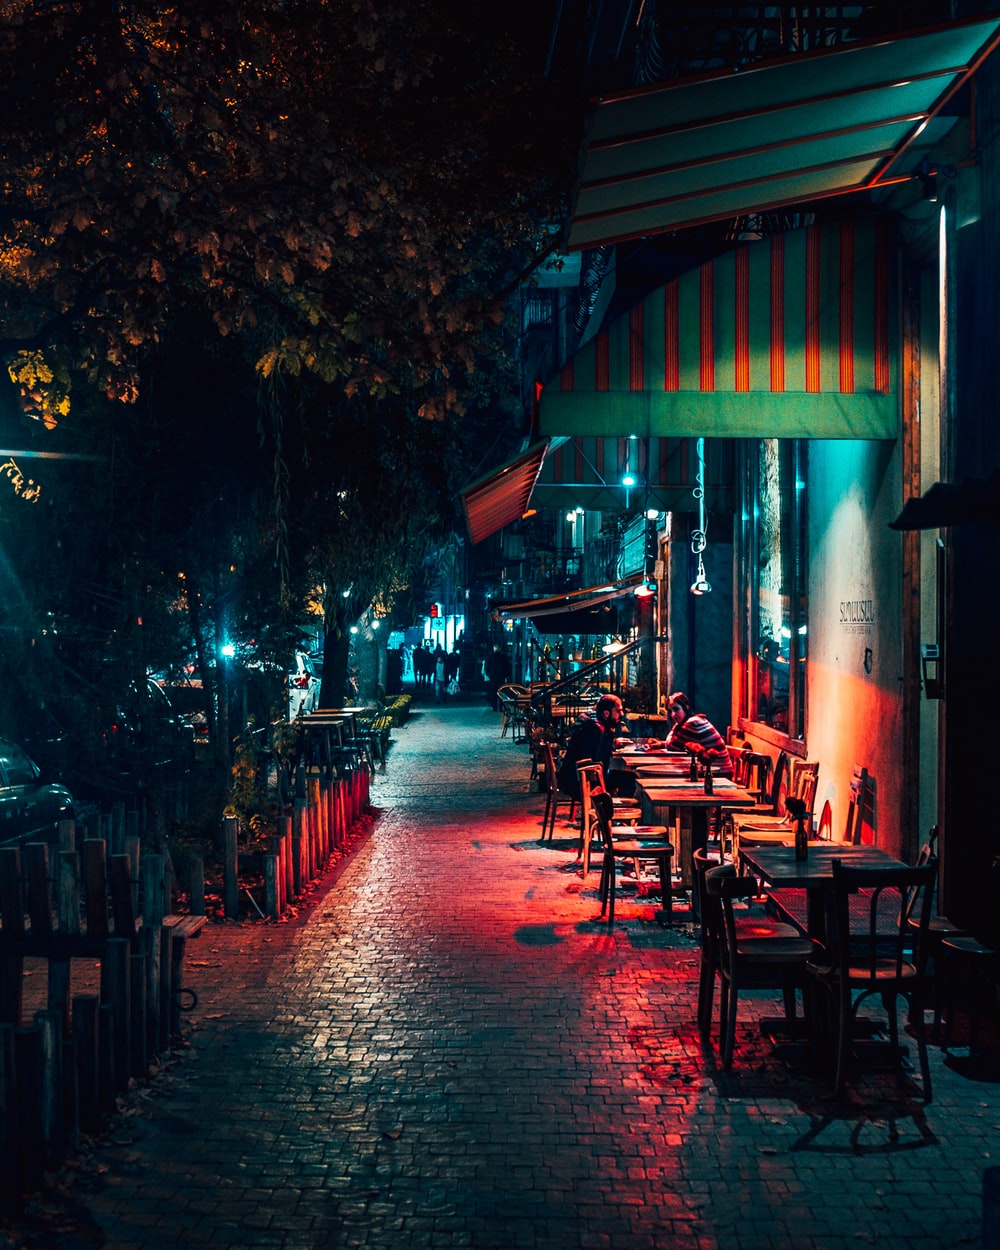 Cafe Night Picture. Download Free Image